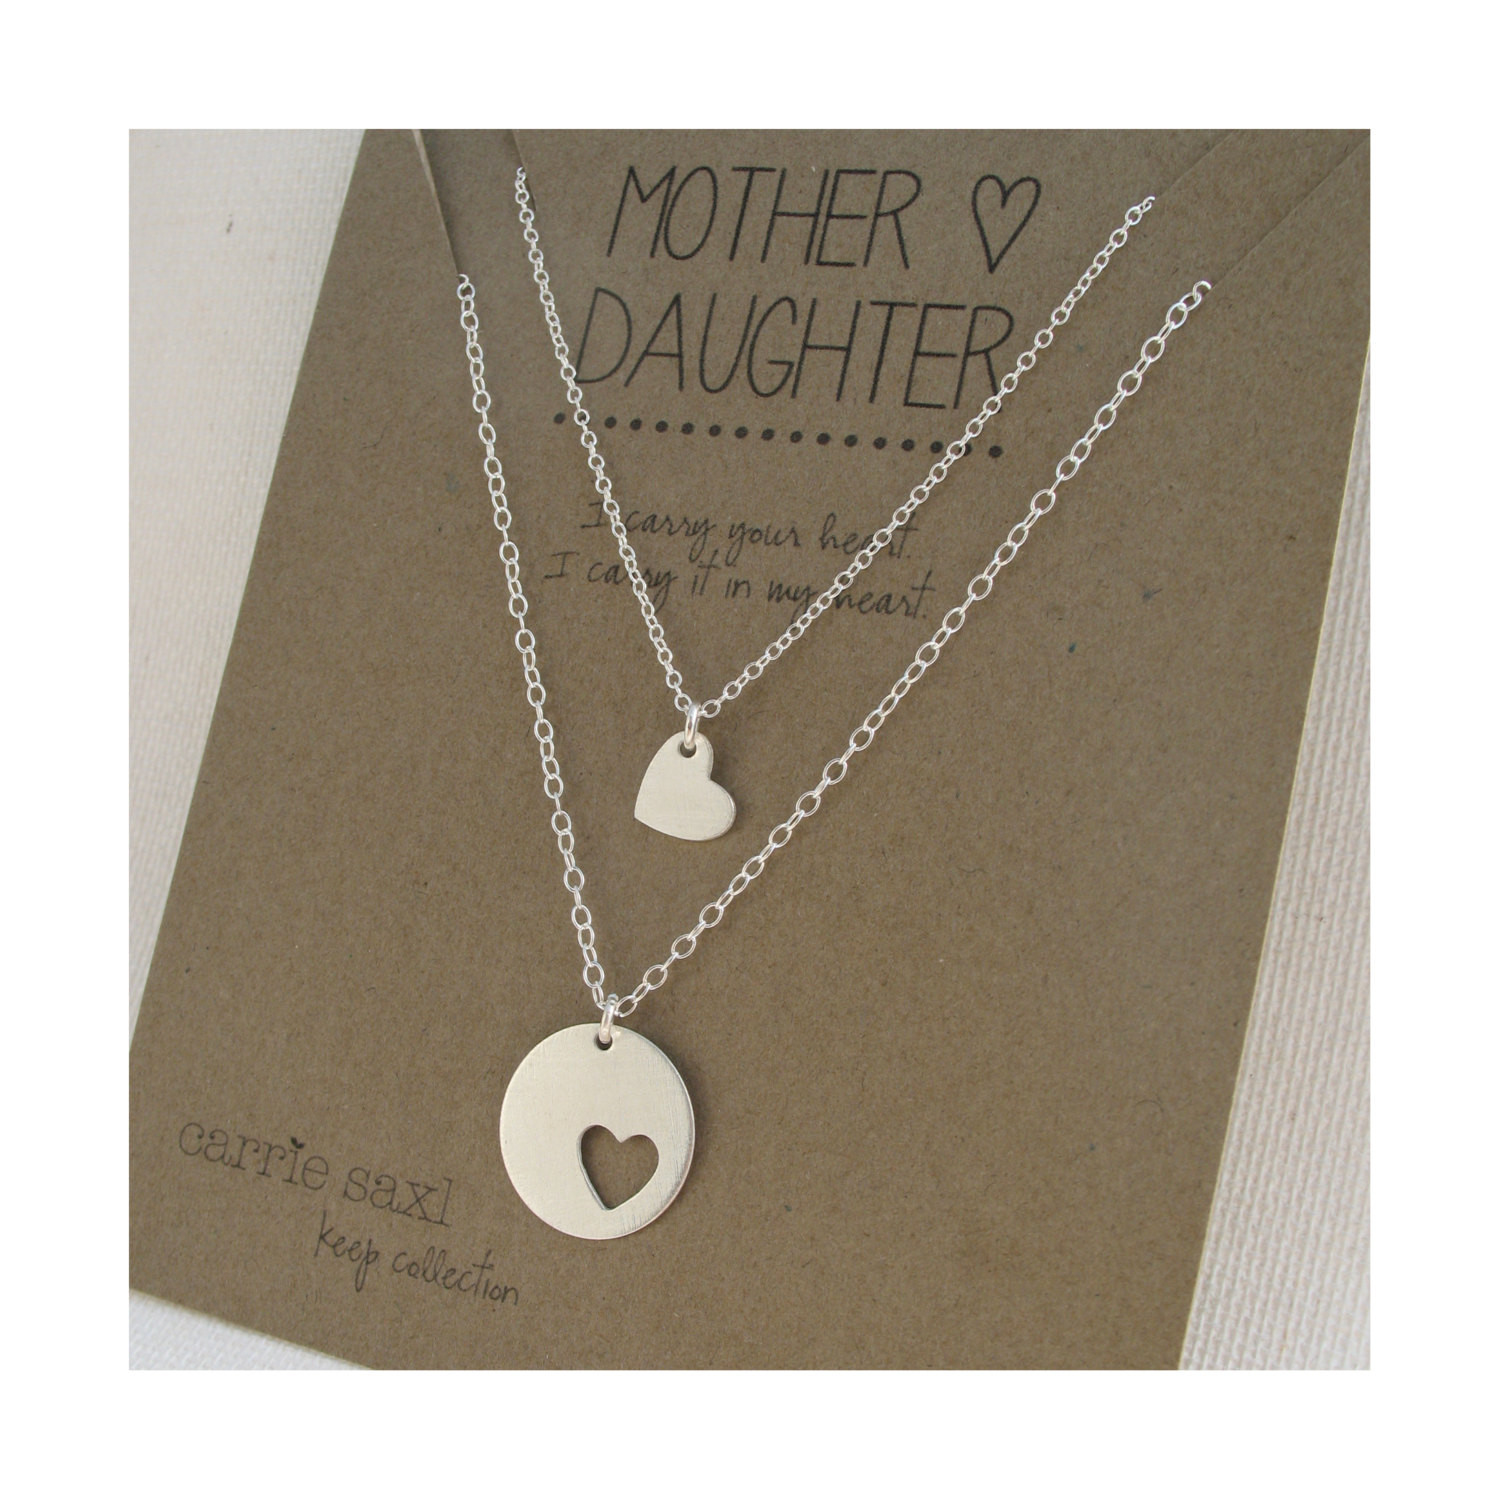 Mother Daughter Necklace Set
 Mother Daughter Necklace Set hearts necklace by carriesaxl